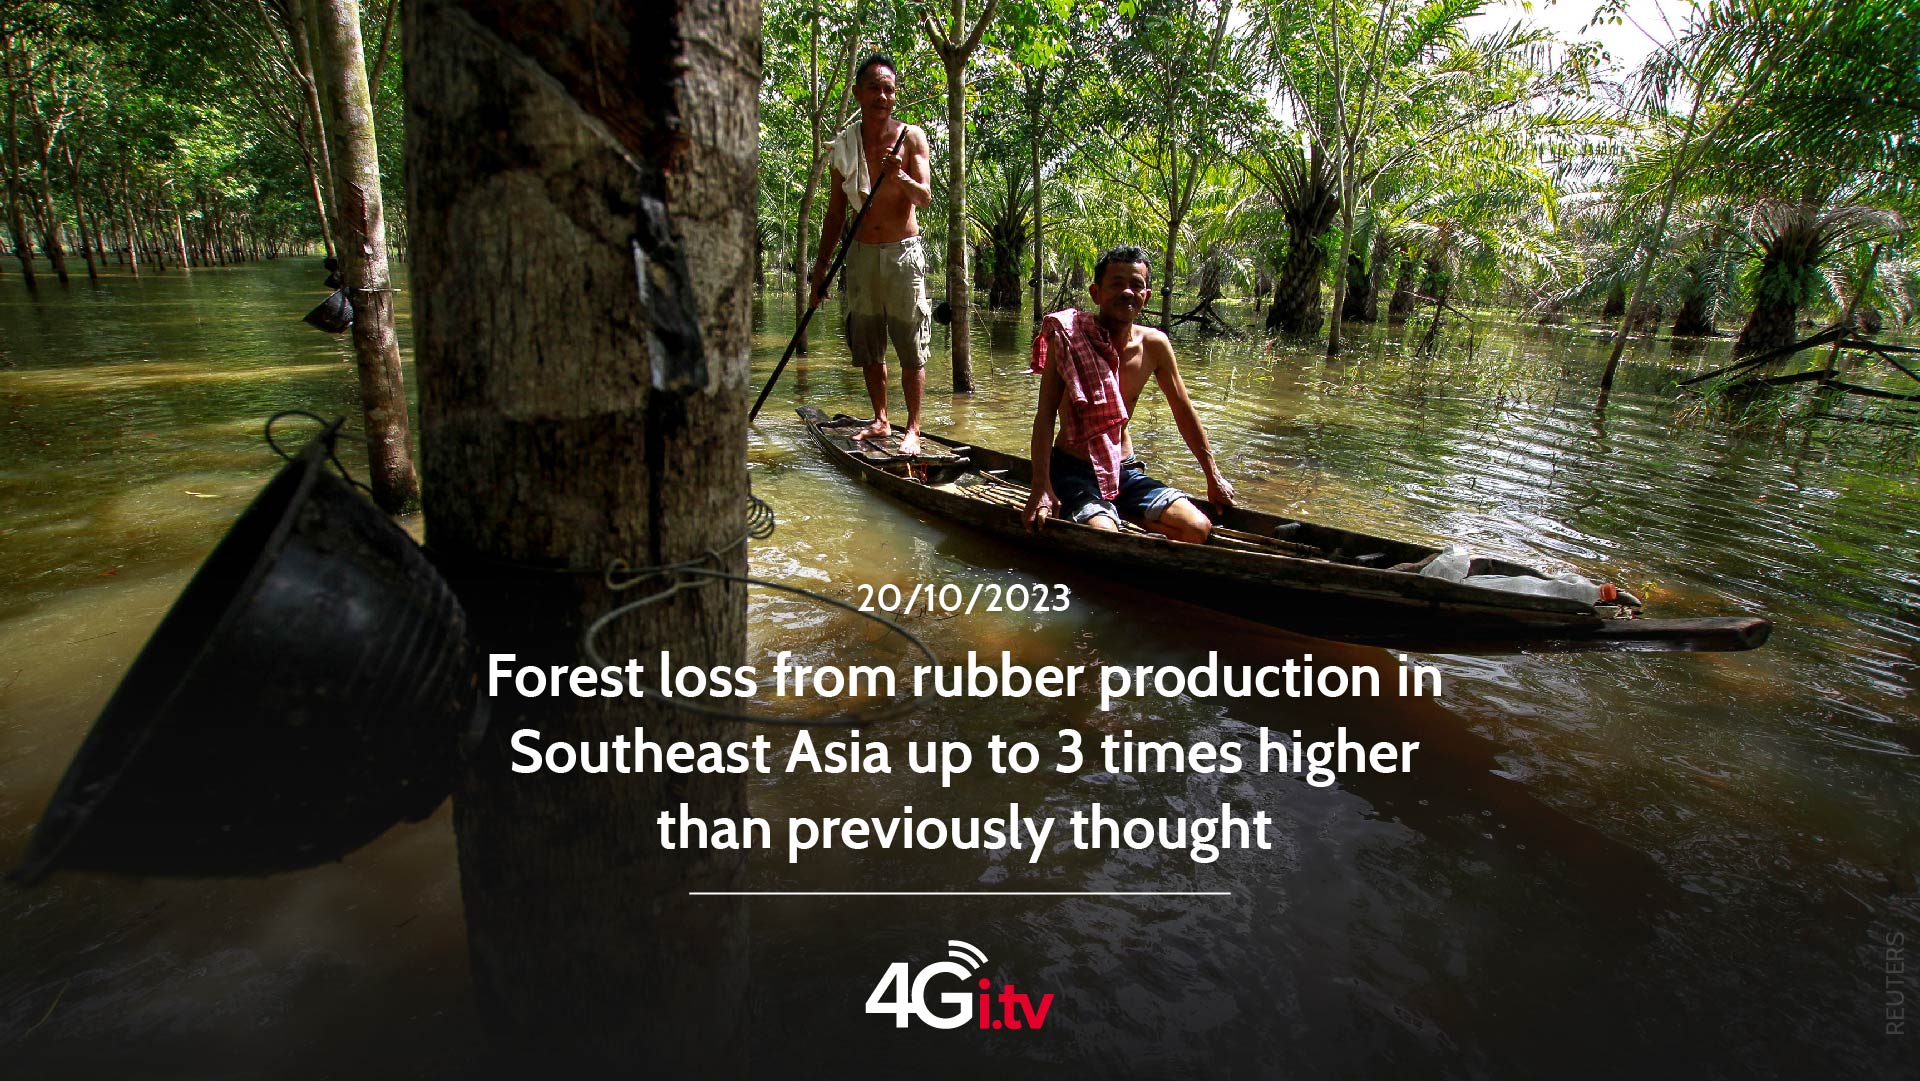 Подробнее о статье Forest loss from rubber production in Southeast Asia up to 3 times higher than previously thought